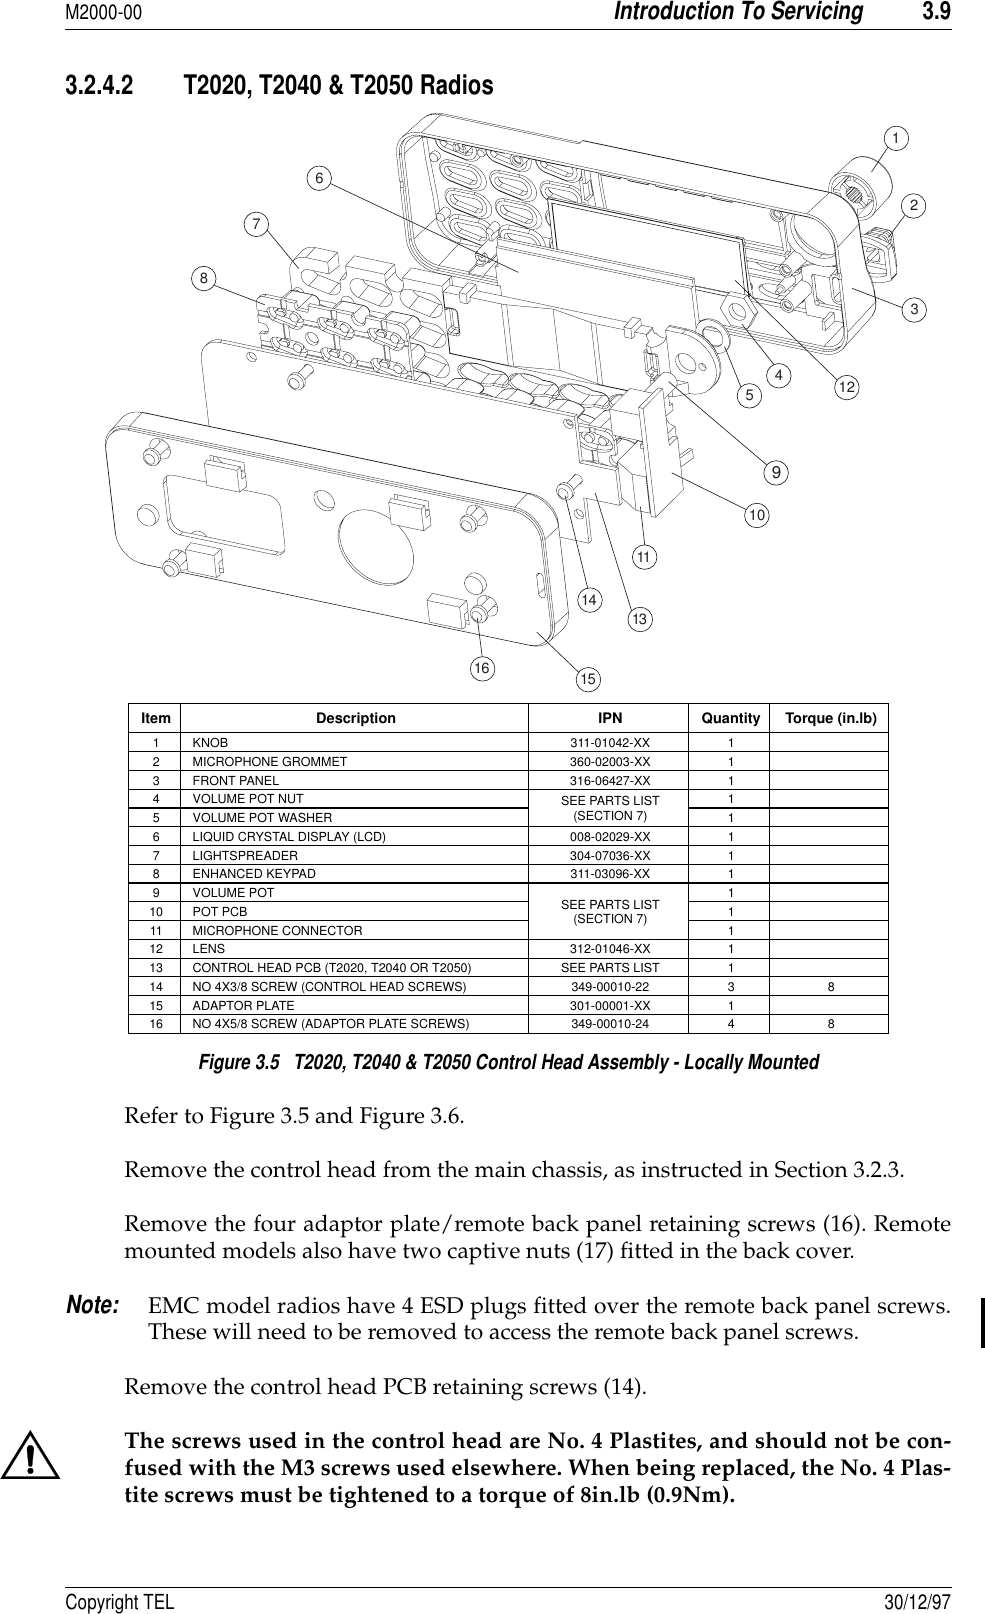 M2000-00Introduction To Servicing3.9Copyright TEL 30/12/973.2.4.2 T2020, T2040 &amp; T2050 Radios Figure 3.5   T2020, T2040 &amp; T2050 Control Head Assembly - Locally Mounted Refer to Figure 3.5 and Figure 3.6.Remove the control head from the main chassis, as instructed in Section 3.2.3.Remove the four adaptor plate/remote back panel retaining screws (16). Remotemounted models also have two captive nuts (17) fitted in the back cover.Note:EMC model radios have 4 ESD plugs fitted over the remote back panel screws.These will need to be removed to access the remote back panel screws.Remove the control head PCB retaining screws (14).The screws used in the control head are No. 4 Plastites, and should not be con-fused with the M3 screws used elsewhere. When being replaced, the No. 4 Plas-tite screws must be tightened to a torque of 8in.lb (0.9Nm).Item Description IPN Quantity Torque (in.lb)1 KNOB 311-01042-XX 12 MICROPHONE GROMMET 360-02003-XX 13 FRONT PANEL 316-06427-XX 14 VOLUME POT NUT SEE PARTS LIST(SECTION 7)15 VOLUME POT WASHER 16 LIQUID CRYSTAL DISPLAY (LCD) 008-02029-XX 17 LIGHTSPREADER 304-07036-XX 18 ENHANCED KEYPAD 311-03096-XX 19VOLUME POT SEE PARTS LIST(SECTION 7)110 POT PCB 111 MICROPHONE CONNECTOR 112 LENS 312-01046-XX 113 CONTROL HEAD PCB (T2020, T2040 OR T2050) SEE PARTS LIST 114 NO 4X3/8 SCREW (CONTROL HEAD SCREWS) 349-00010-22 3 815 ADAPTOR PLATE 301-00001-XX 116 NO 4X5/8 SCREW (ADAPTOR PLATE SCREWS) 349-00010-24 4 841096512321157816111314